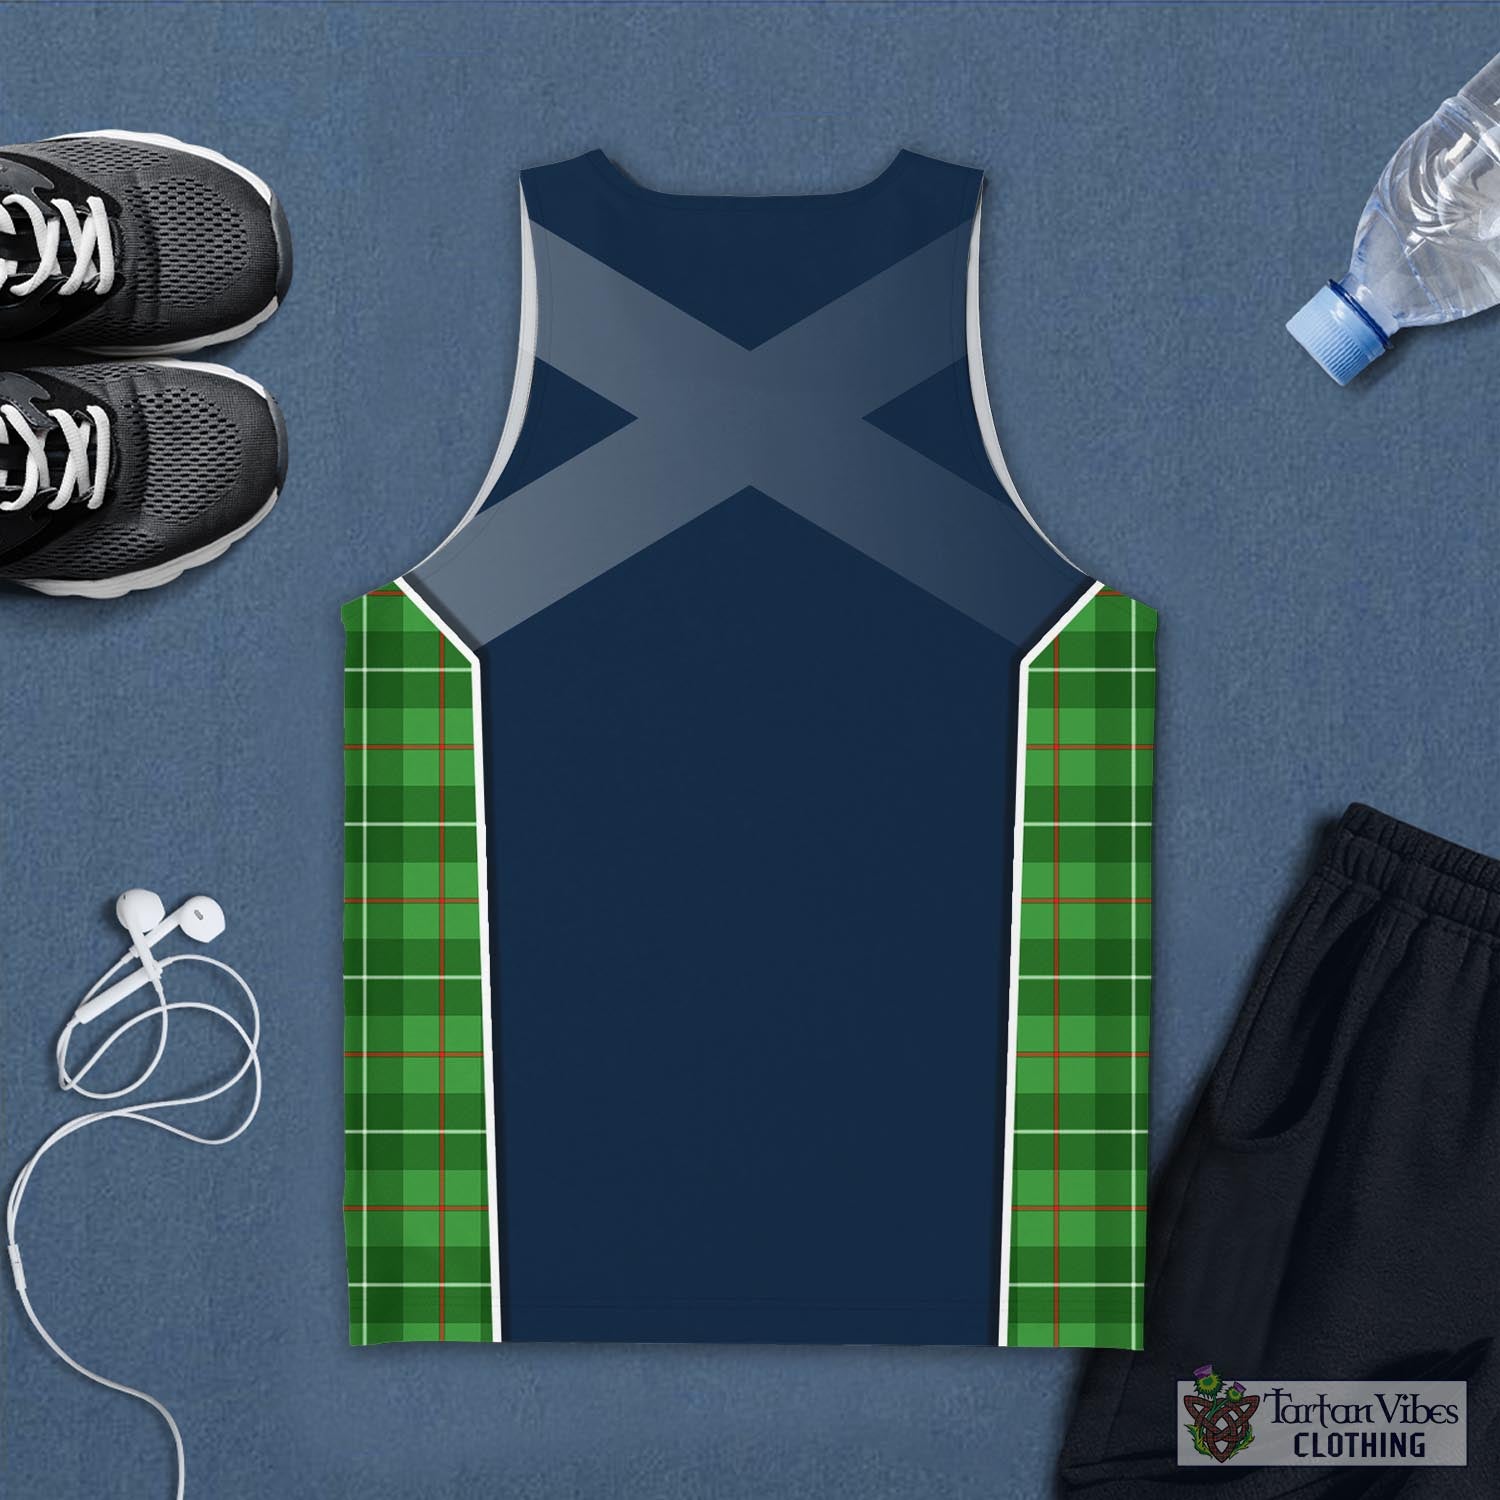 Tartan Vibes Clothing Galloway Tartan Men's Tanks Top with Family Crest and Scottish Thistle Vibes Sport Style